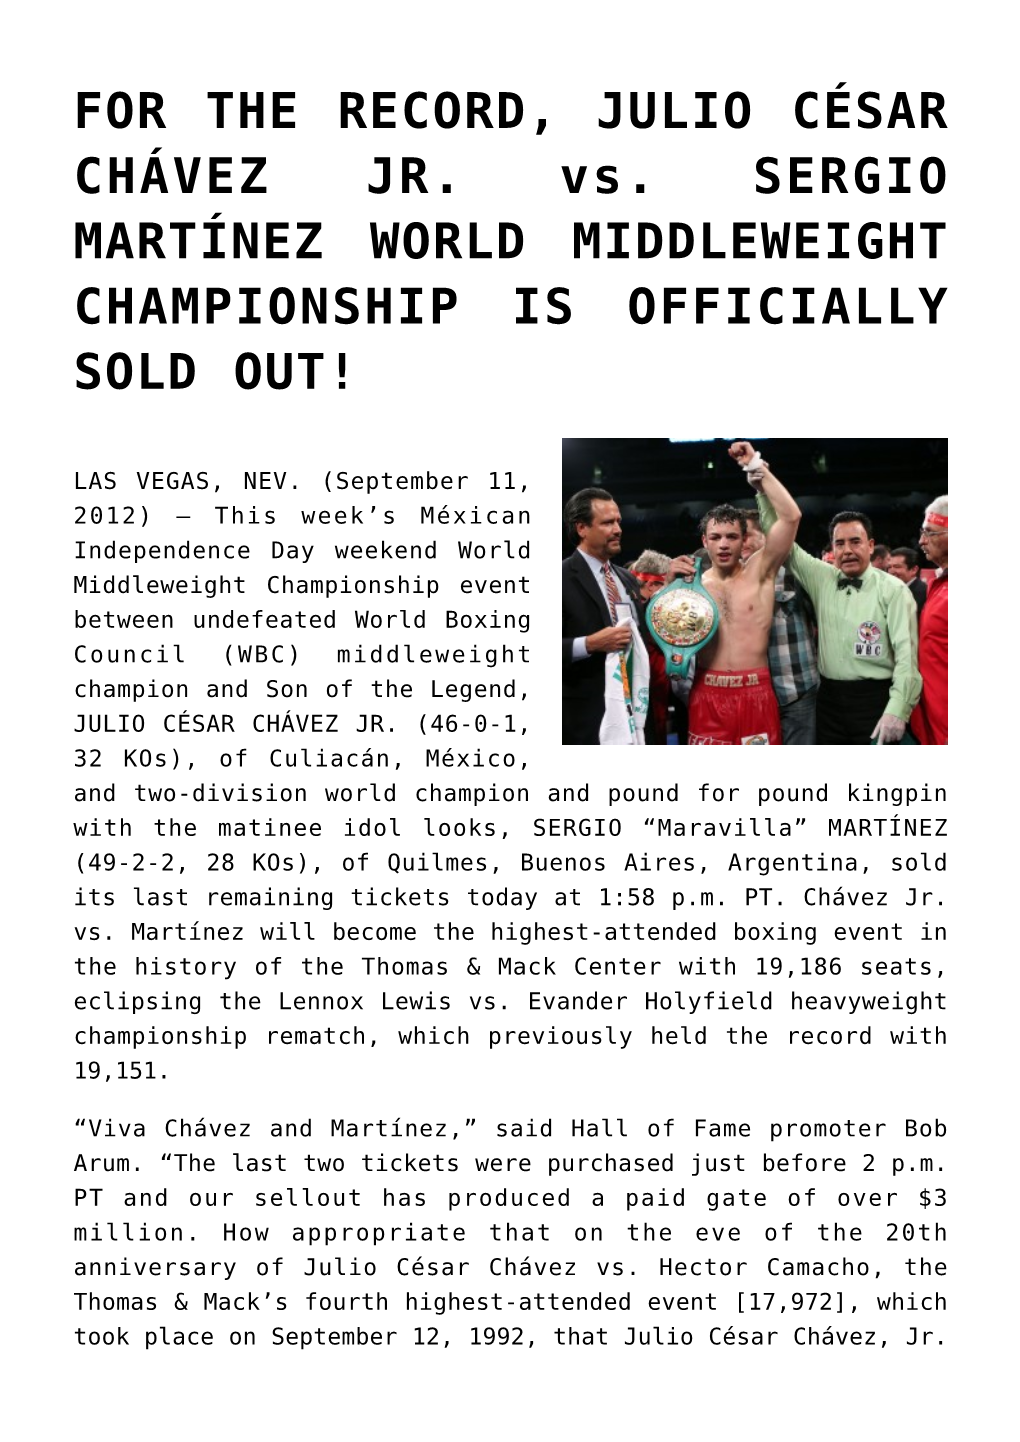 FOR the RECORD, JULIO CÉSAR CHÁVEZ JR. Vs. SERGIO MARTÍNEZ WORLD MIDDLEWEIGHT CHAMPIONSHIP IS OFFICIALLY SOLD OUT!